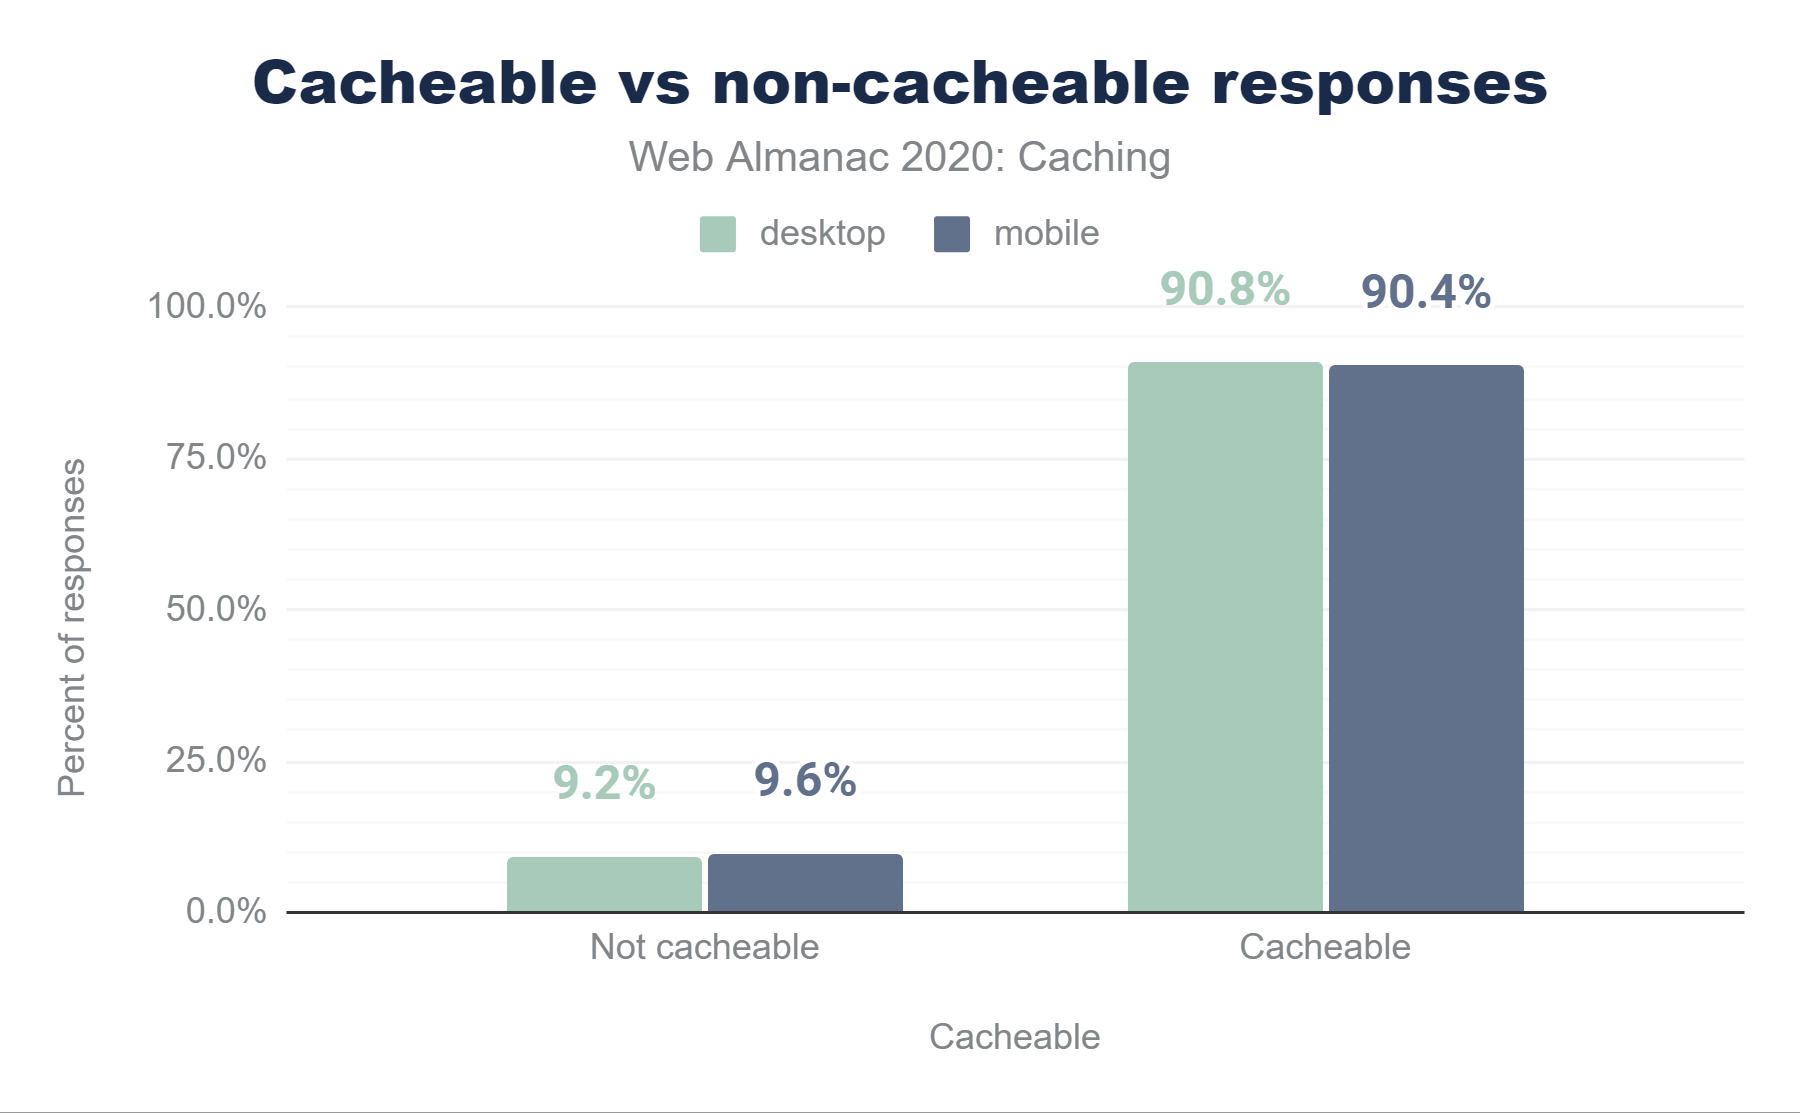 Distribution of cacheable and non-cacheable responses.